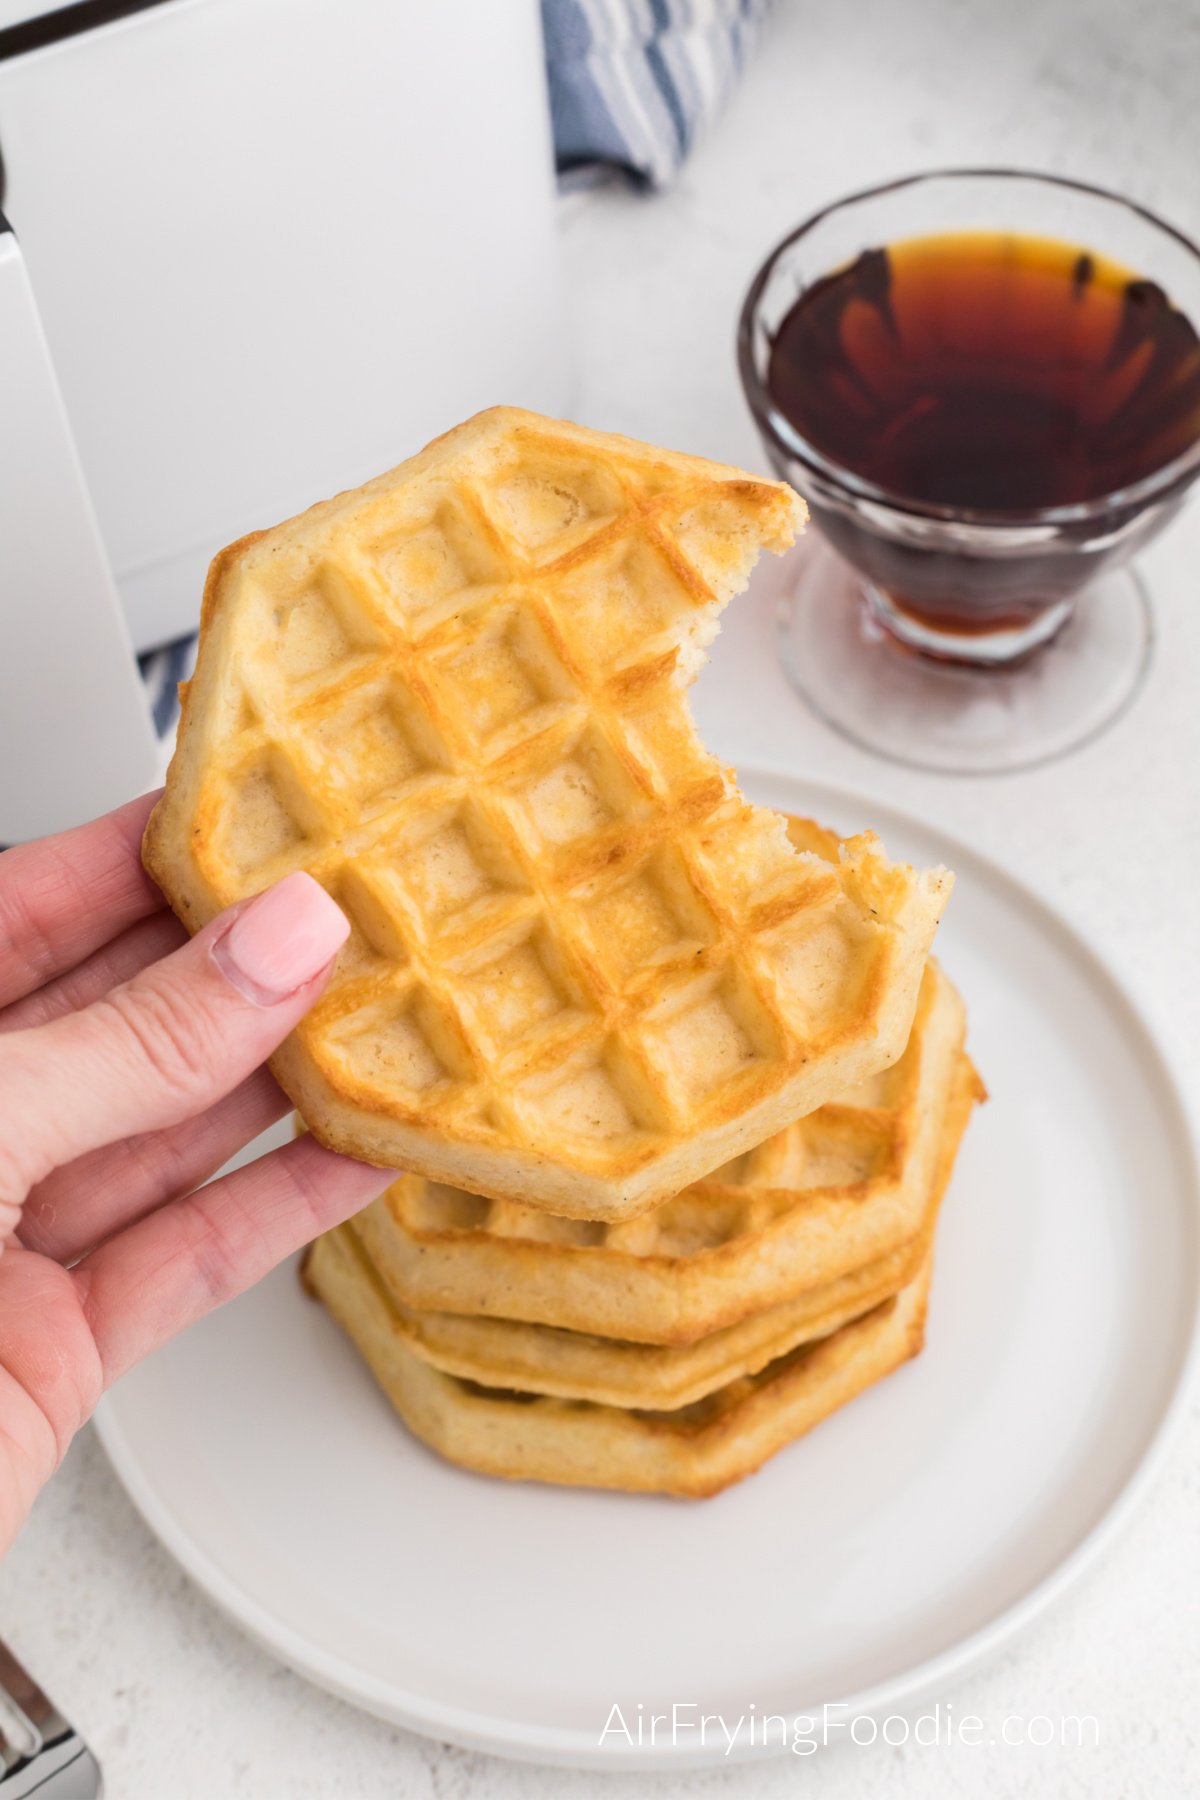 Waffles made in the air fryer from frozen, stacked on a plate, with a hand holding one that is missing a bite.